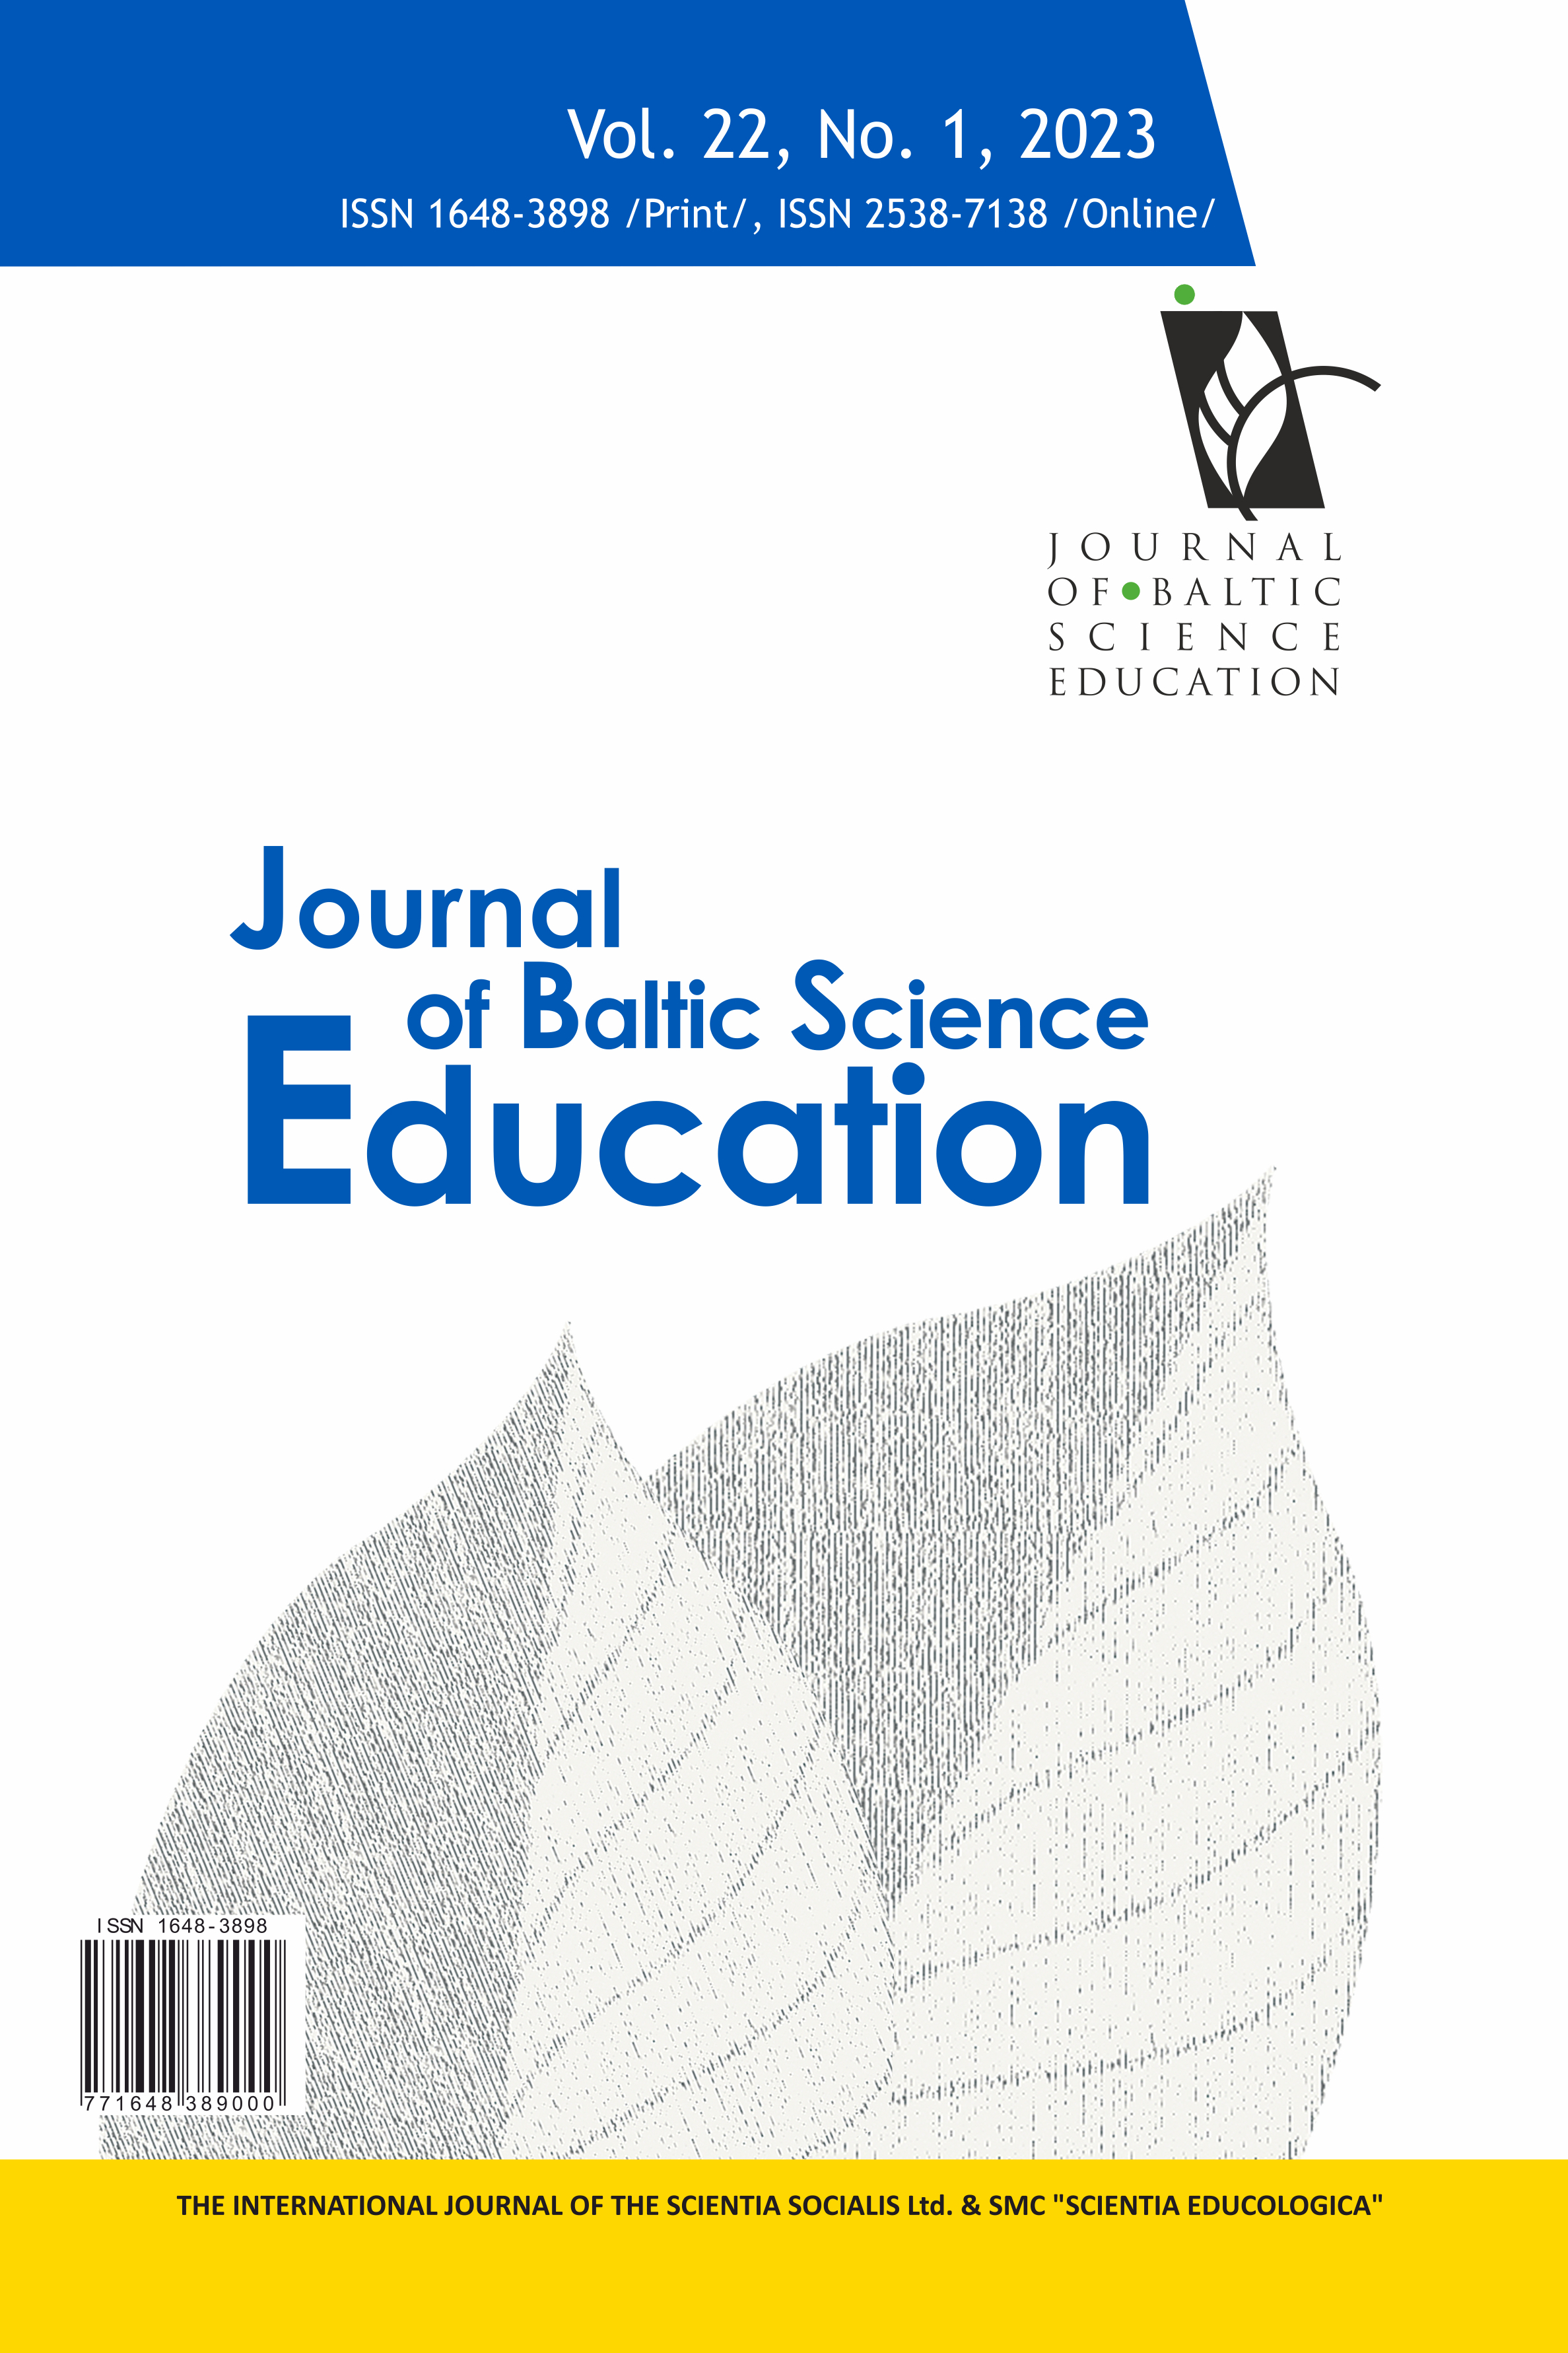 A DIDACTIC UNIT ON MATHEMATICS AND SCIENCE EDUCATION: THE PRINCIPLE OF MATHEMATICAL INDUCTION